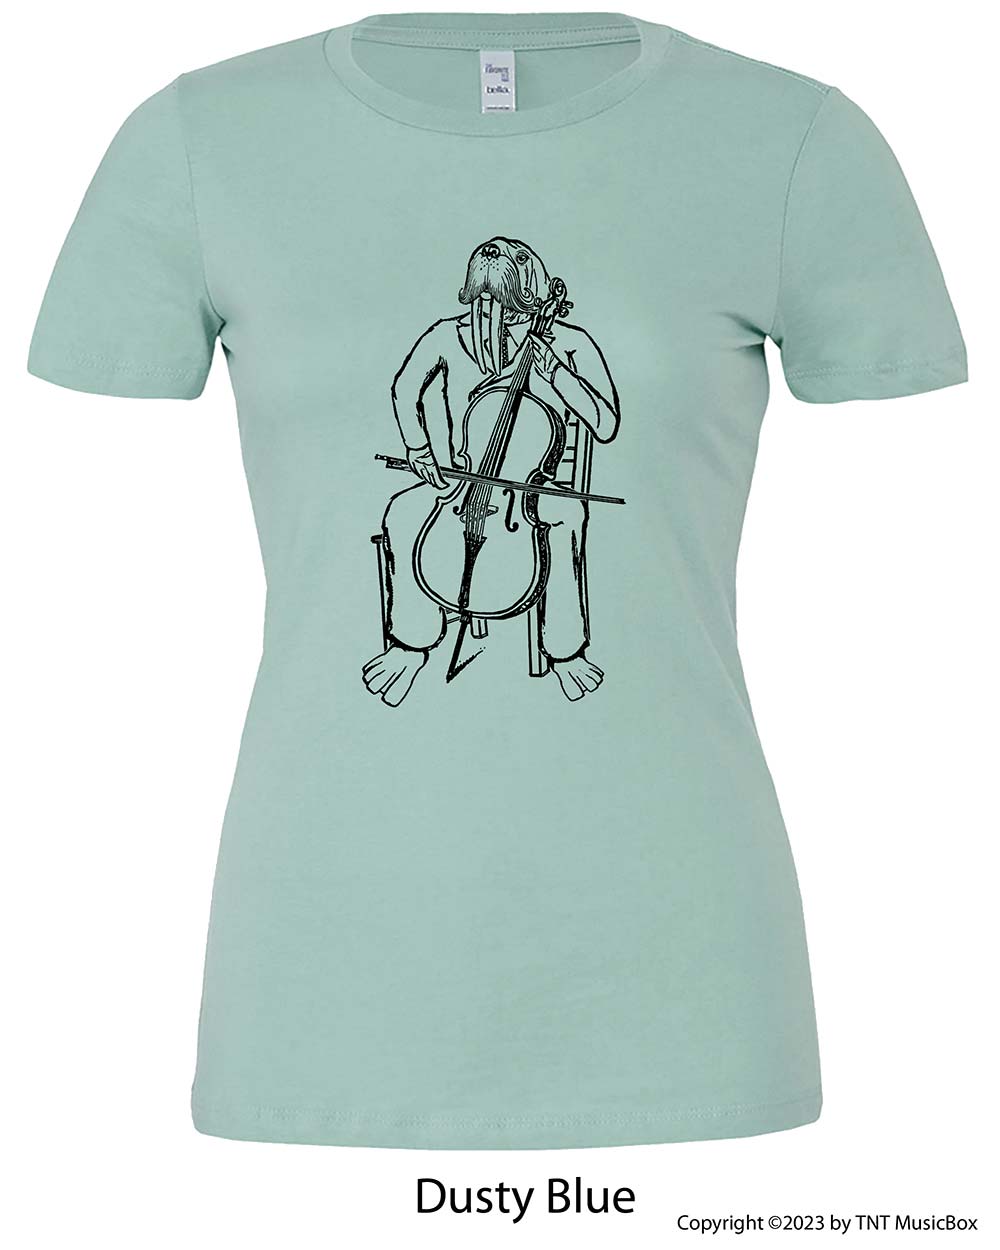 Walrus playing cello on Dusty Blue Tee